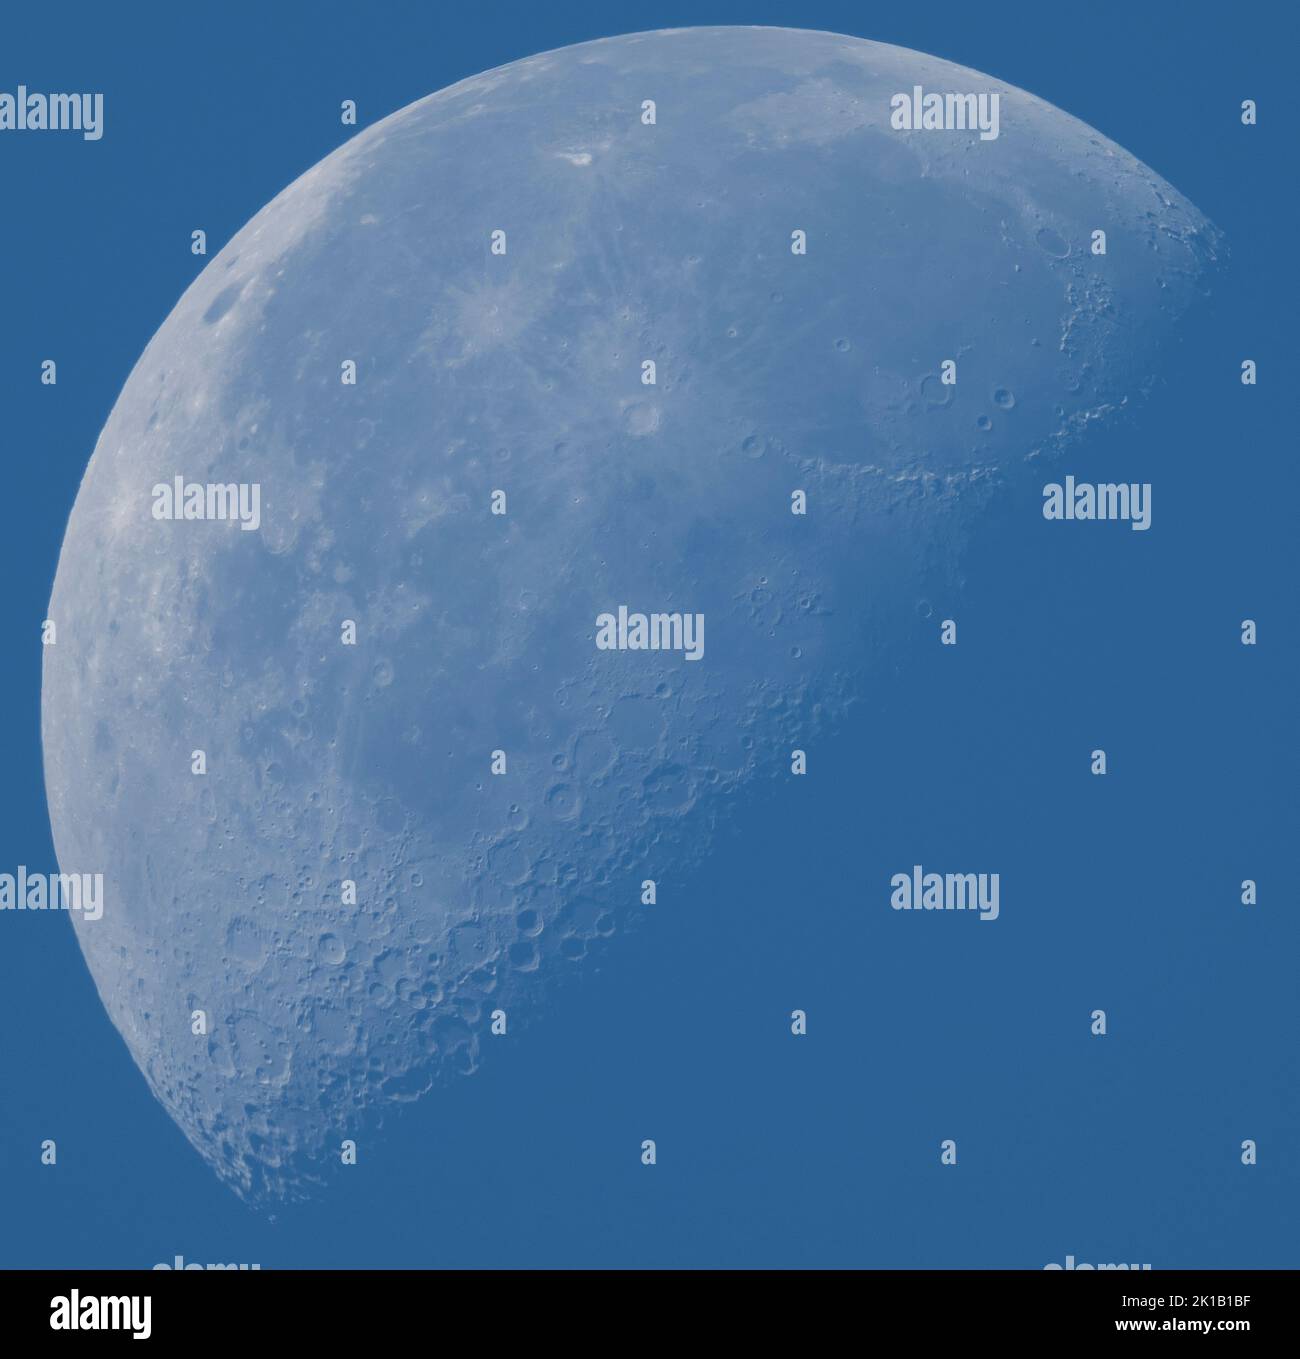 London, UK. 17 September 2022. Morning blue sky and Autumnal temperatures in the capital. Closeup image of the third quarter moon with detailed surface features of craters and mountain ranges. Credit: Malcolm Park/Alamy Live News Stock Photo